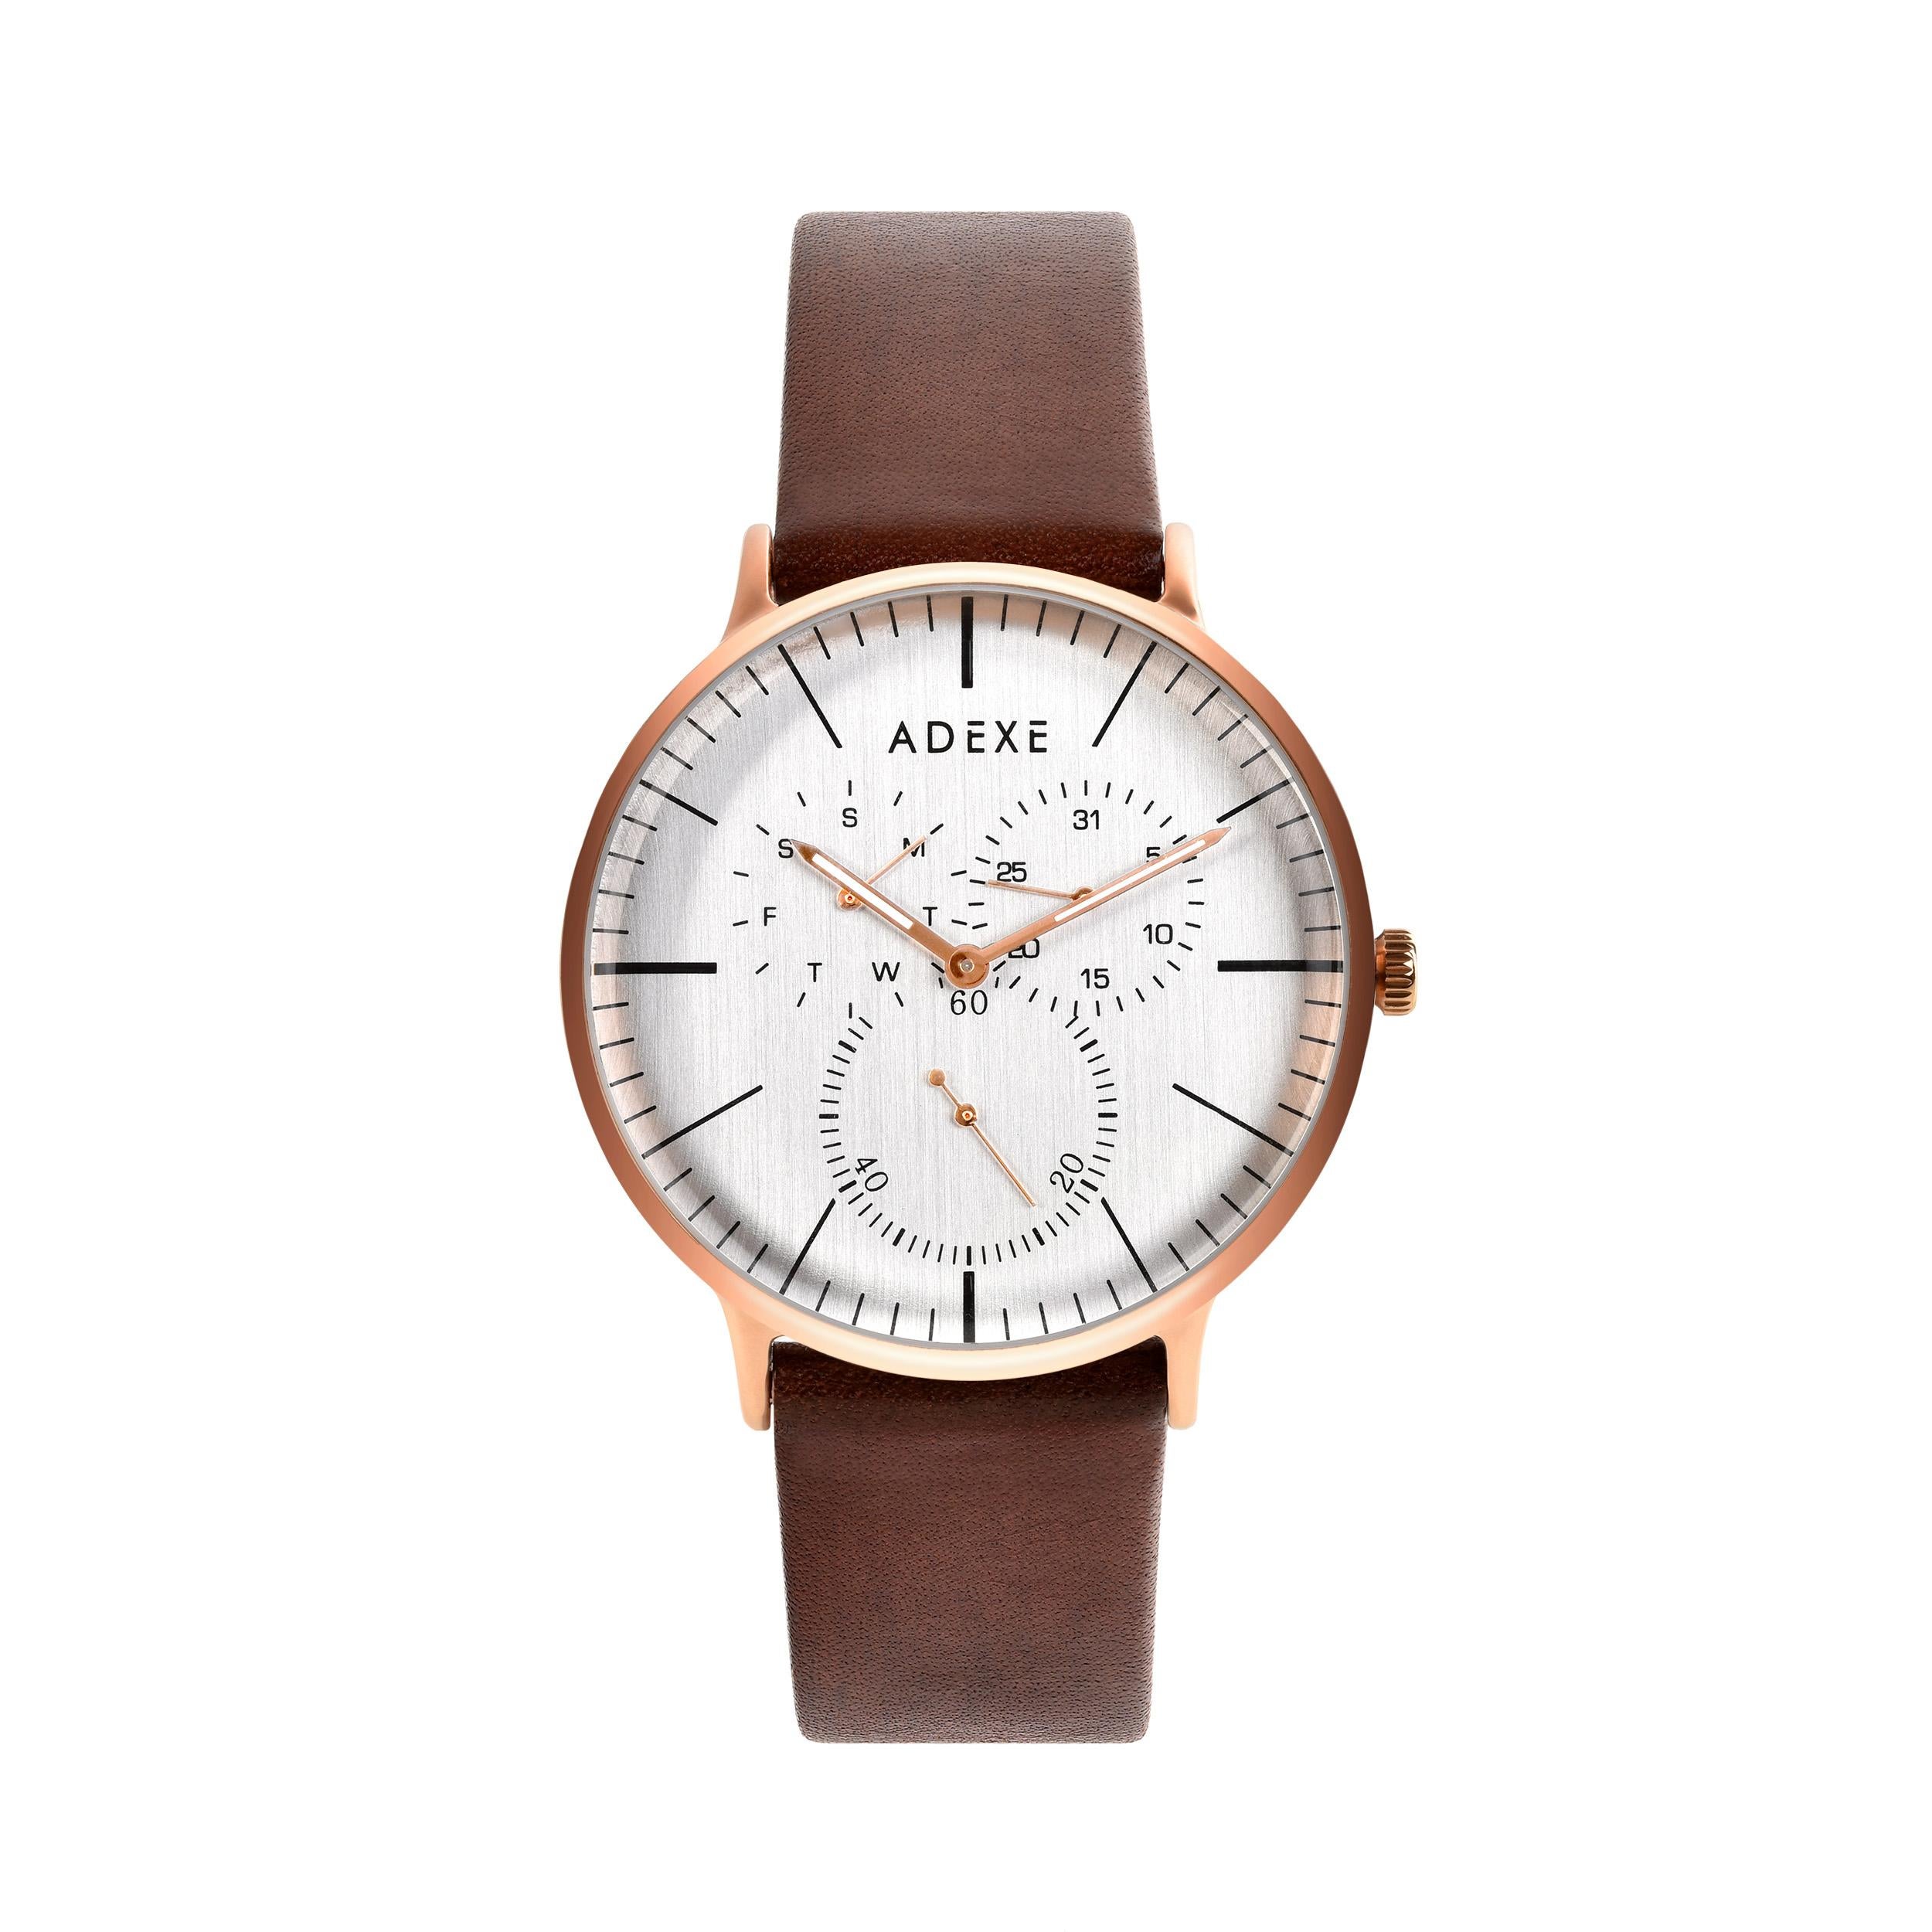 【THEY 】The Timeless Casual Business Watch 

We have specifically chosen the name THEY for this very first collection to identify a truly unisex product, which celebrates diversity and inclusion every day and everywhere.

Official website packaging: